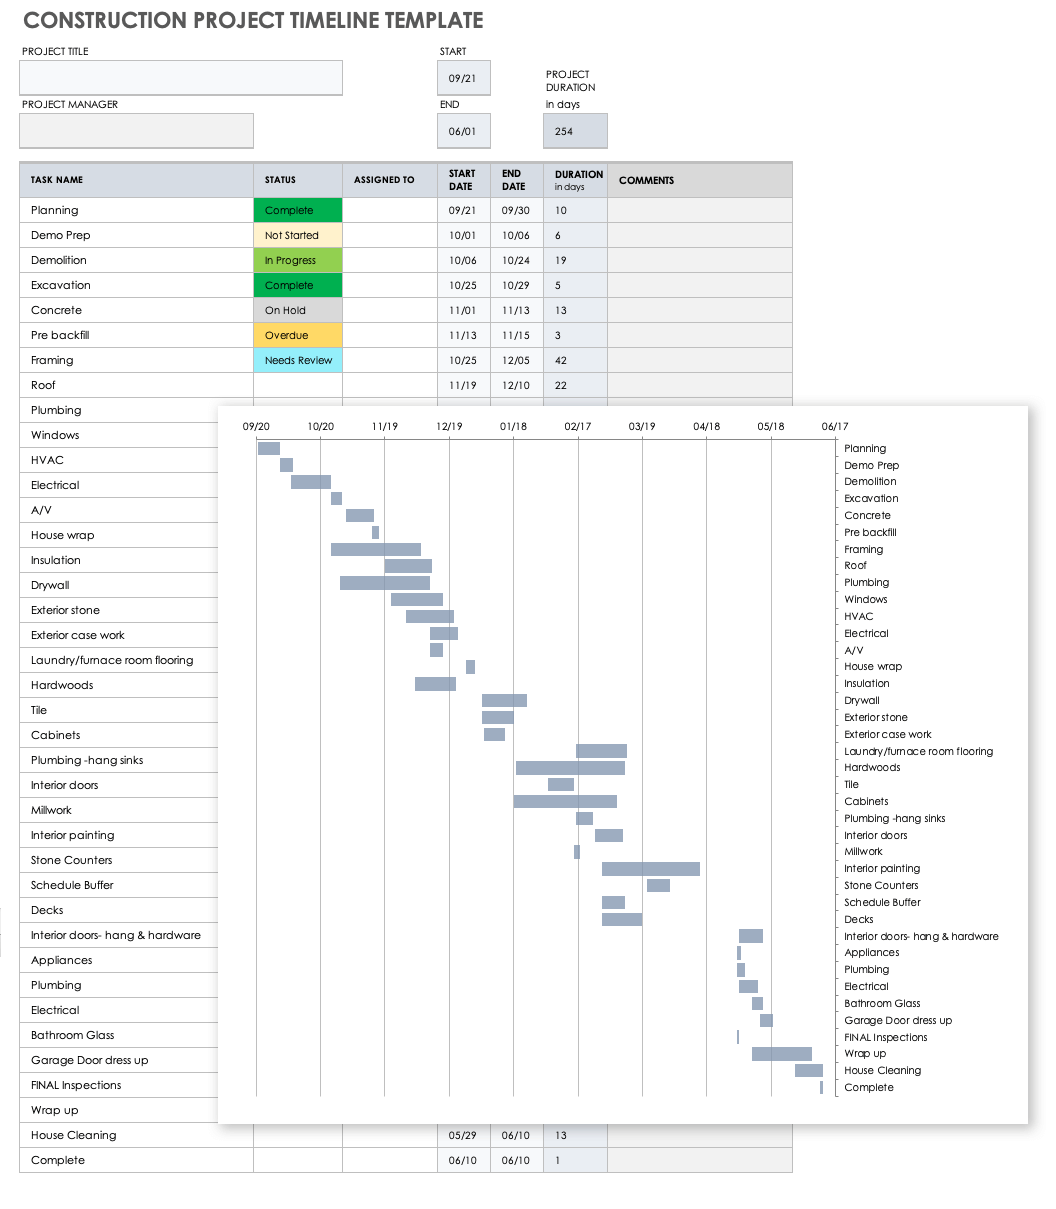 excel project plan timeline template